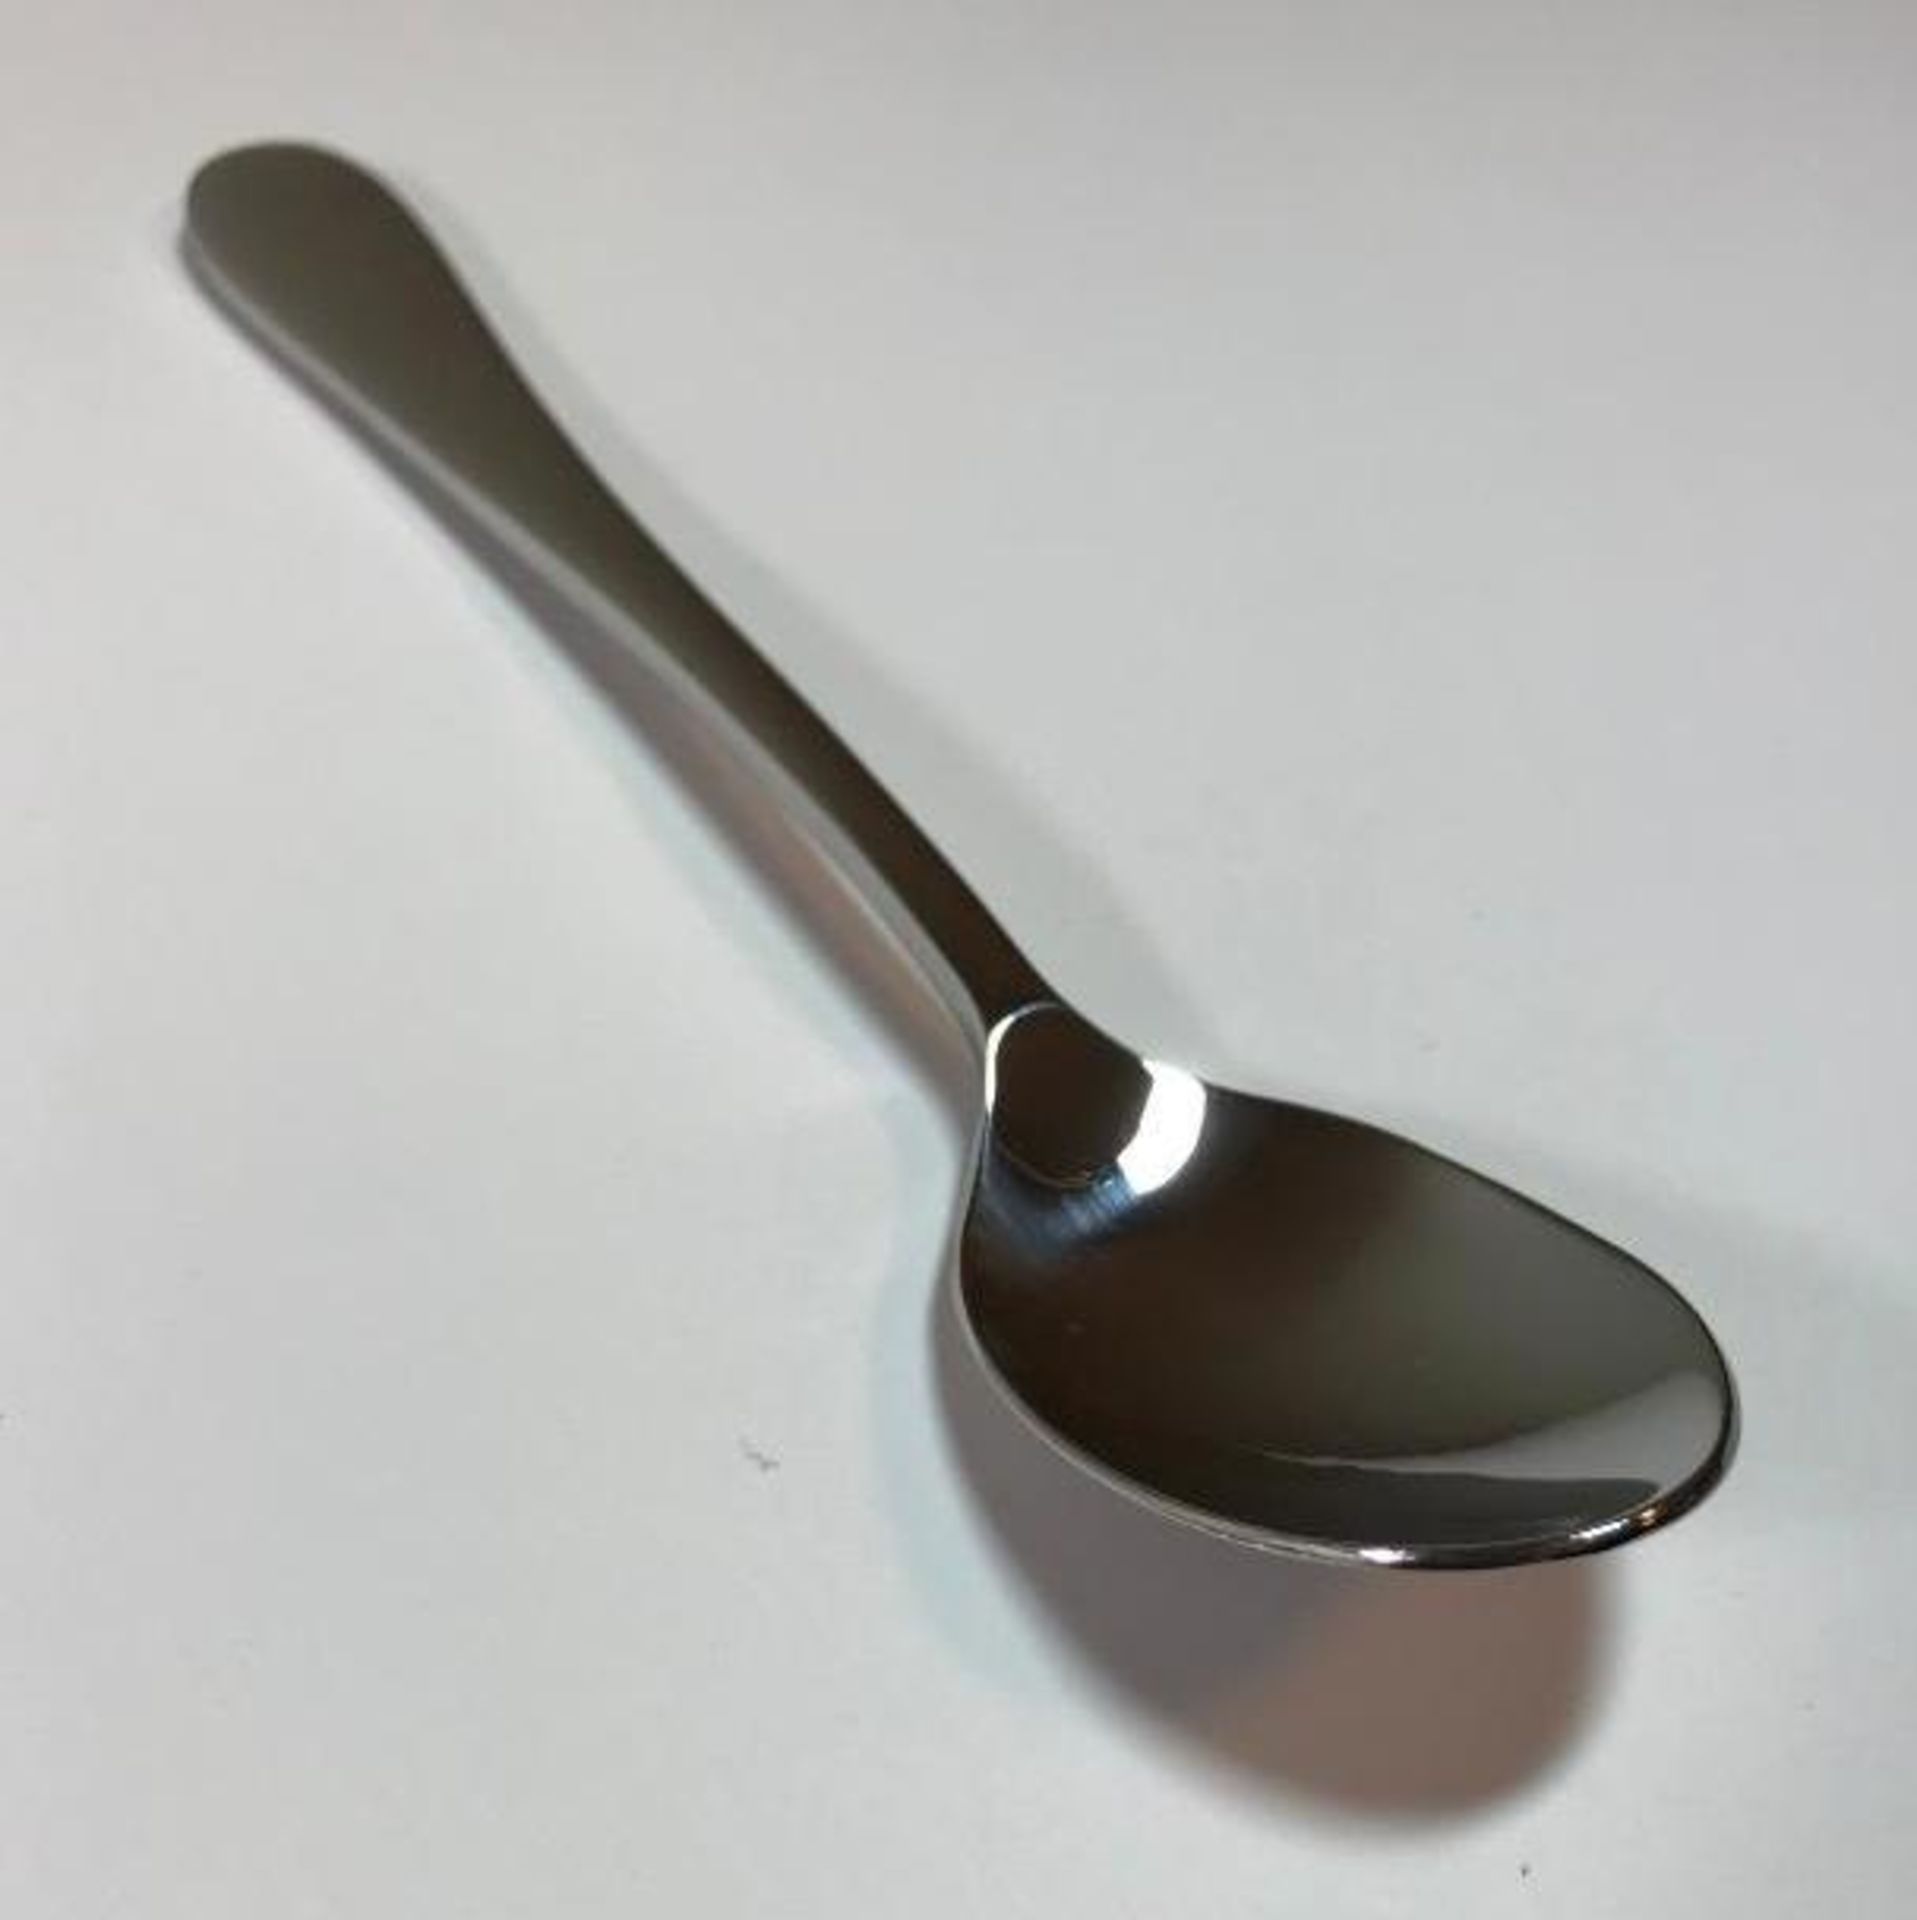 DUDSON EQUUS 4.5" COFFEE SPOON - 12/CASE - NEW - Image 2 of 5